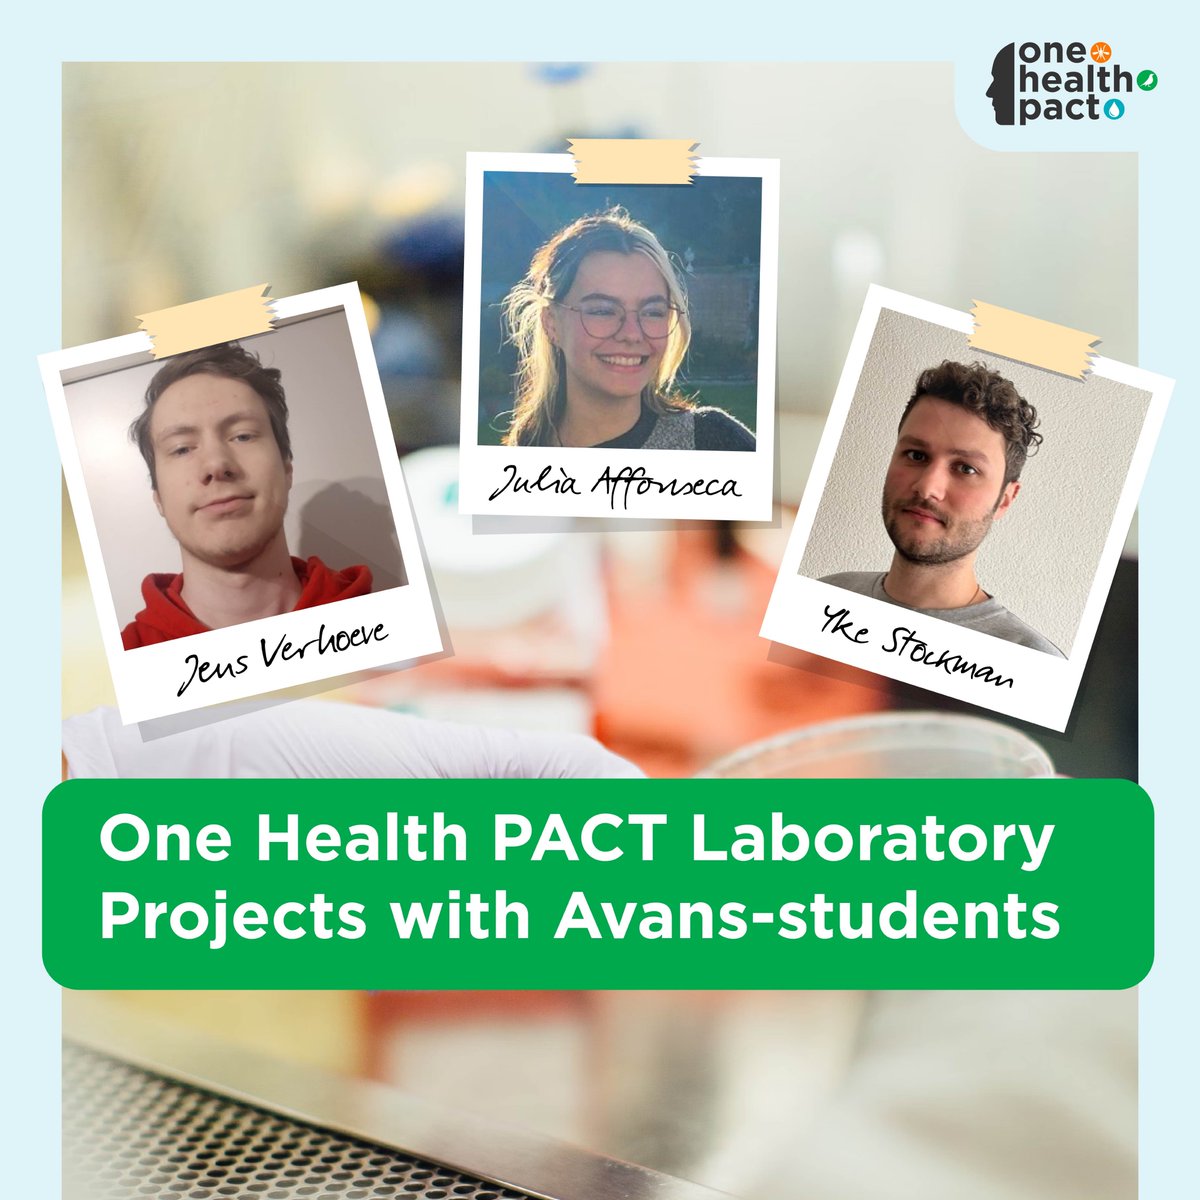 Welcome to the next three Biology and Laboratorial Research students from @AvansHogeschool! Jens Verhoeve, Julia Affonseca and Yke Stockman will be part of our One Health PACT projects. Who are these students? Go to: onehealthpact.org/news/introduci… #onehealth #mosquitoes #Onehealthday